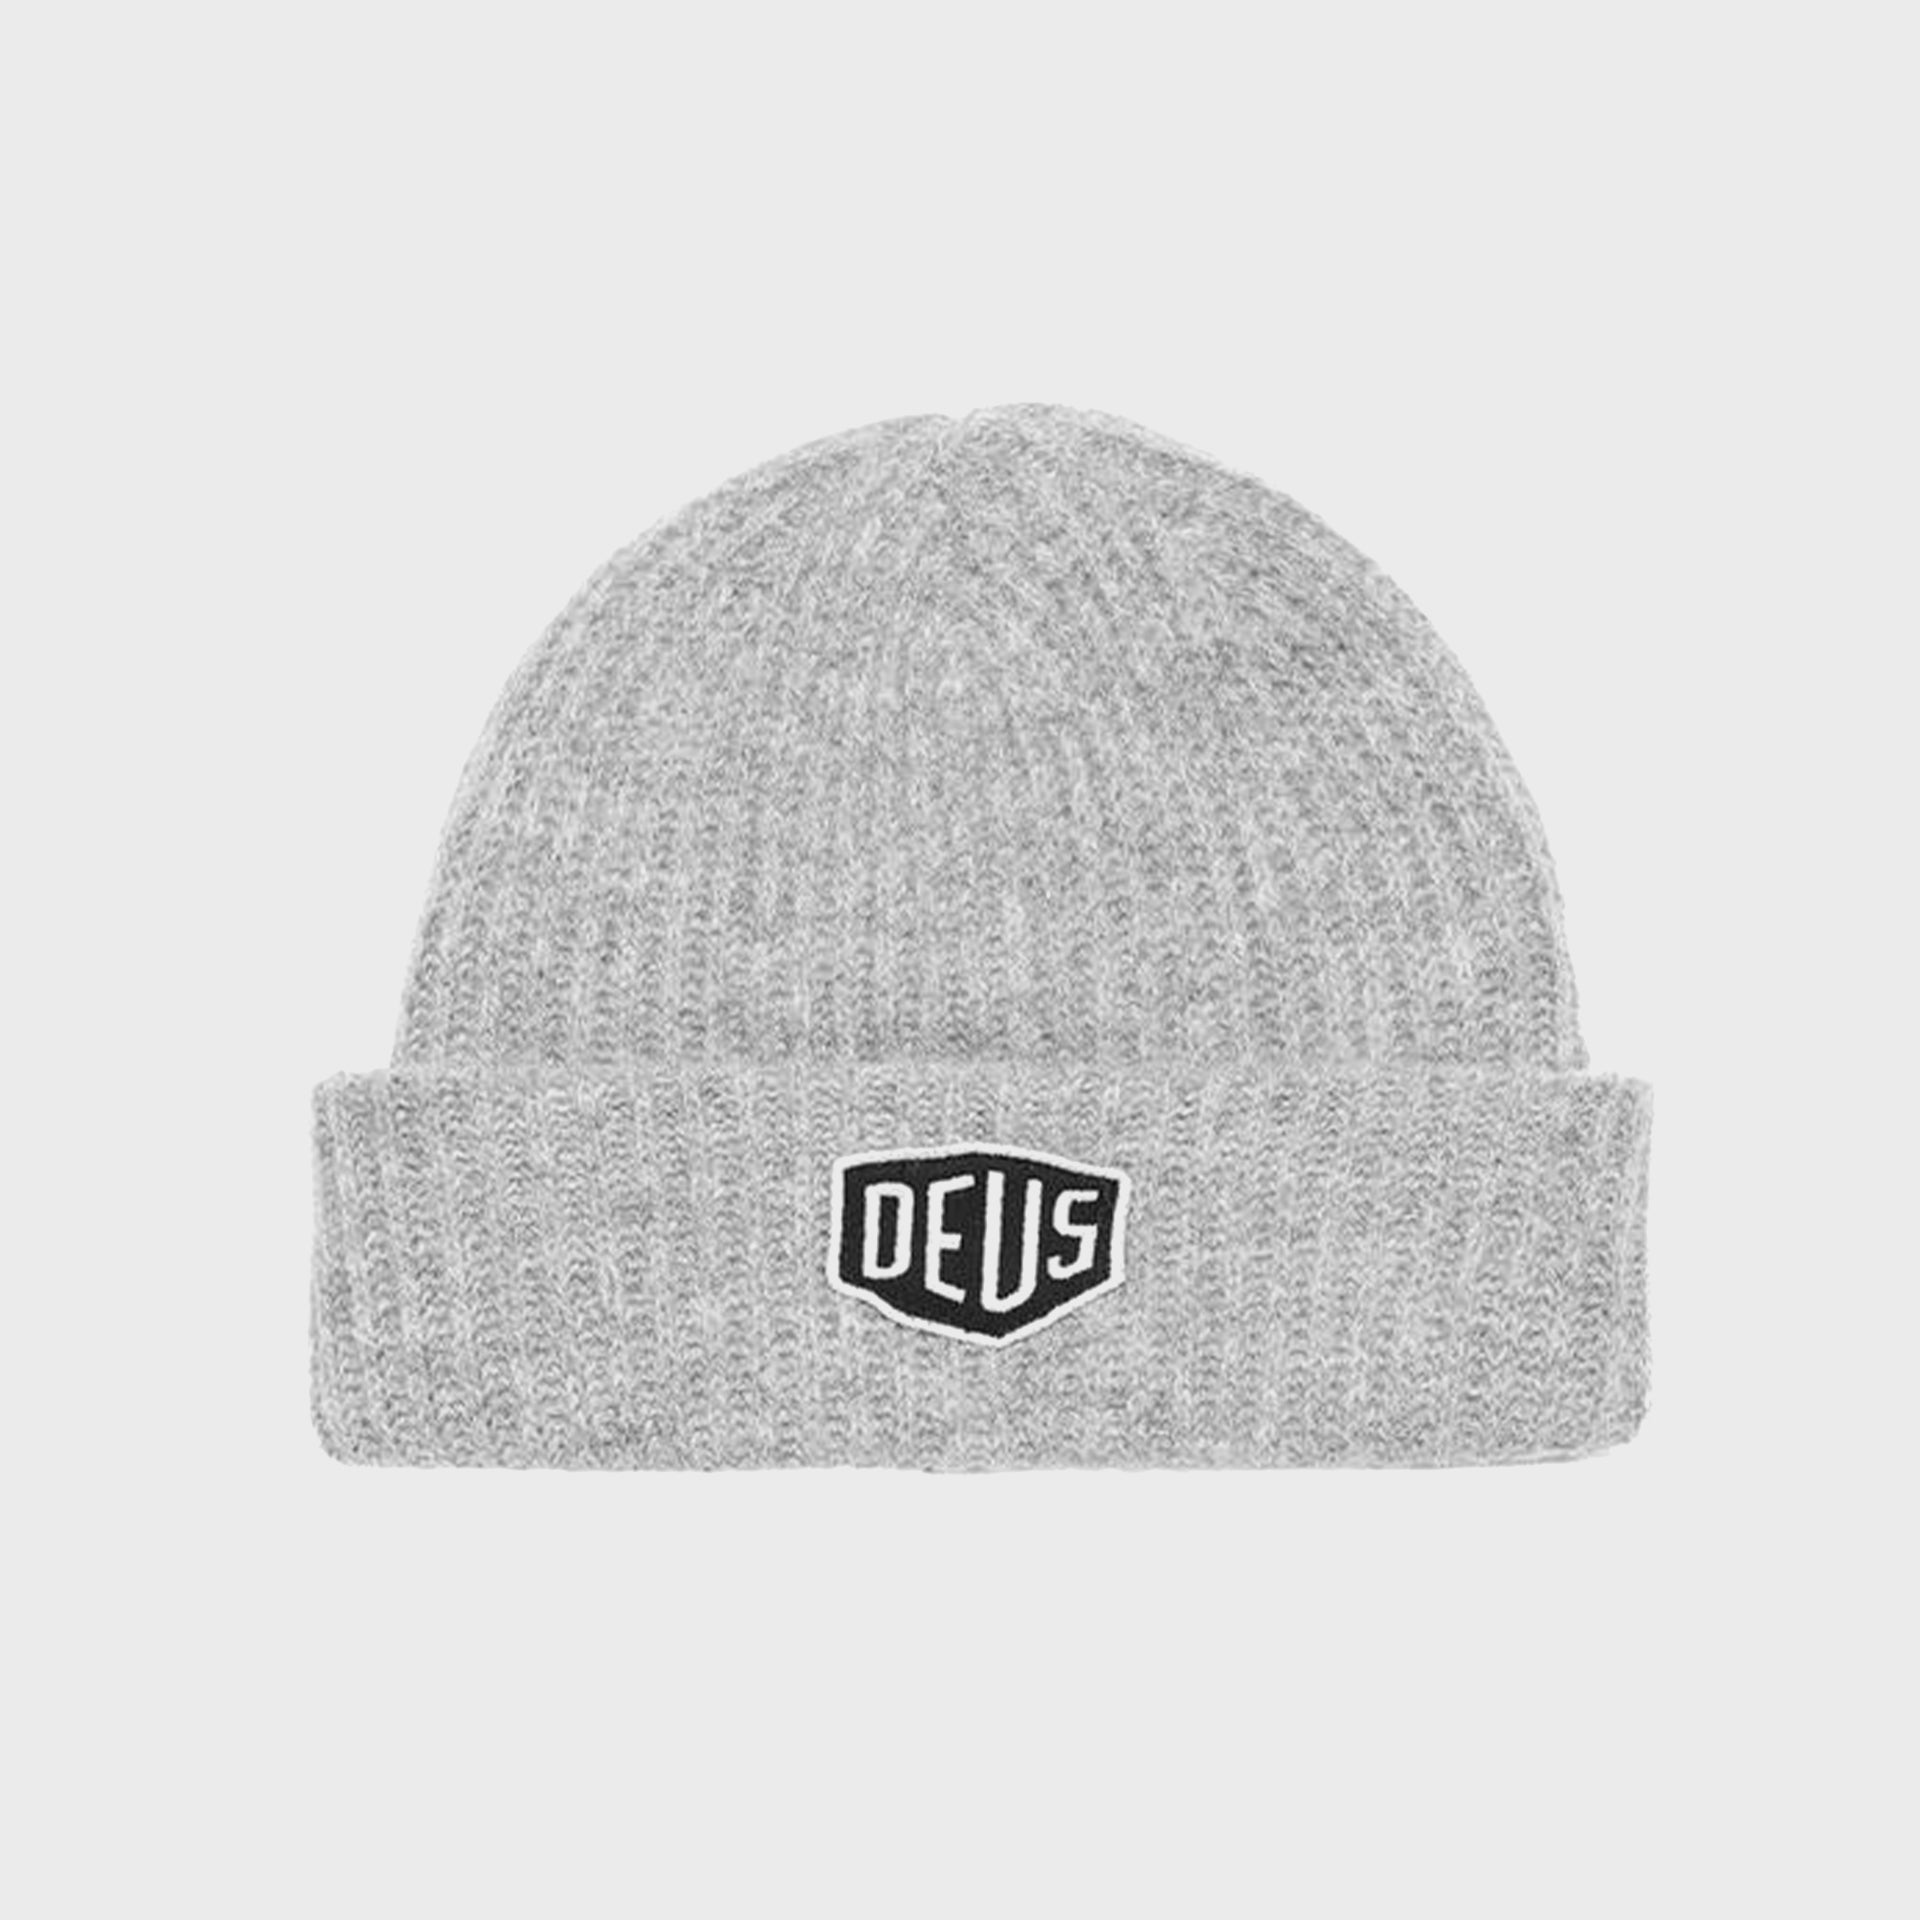 Shield Beanie - Mens Hat - One Size - Charcoal - ManGo Surfing